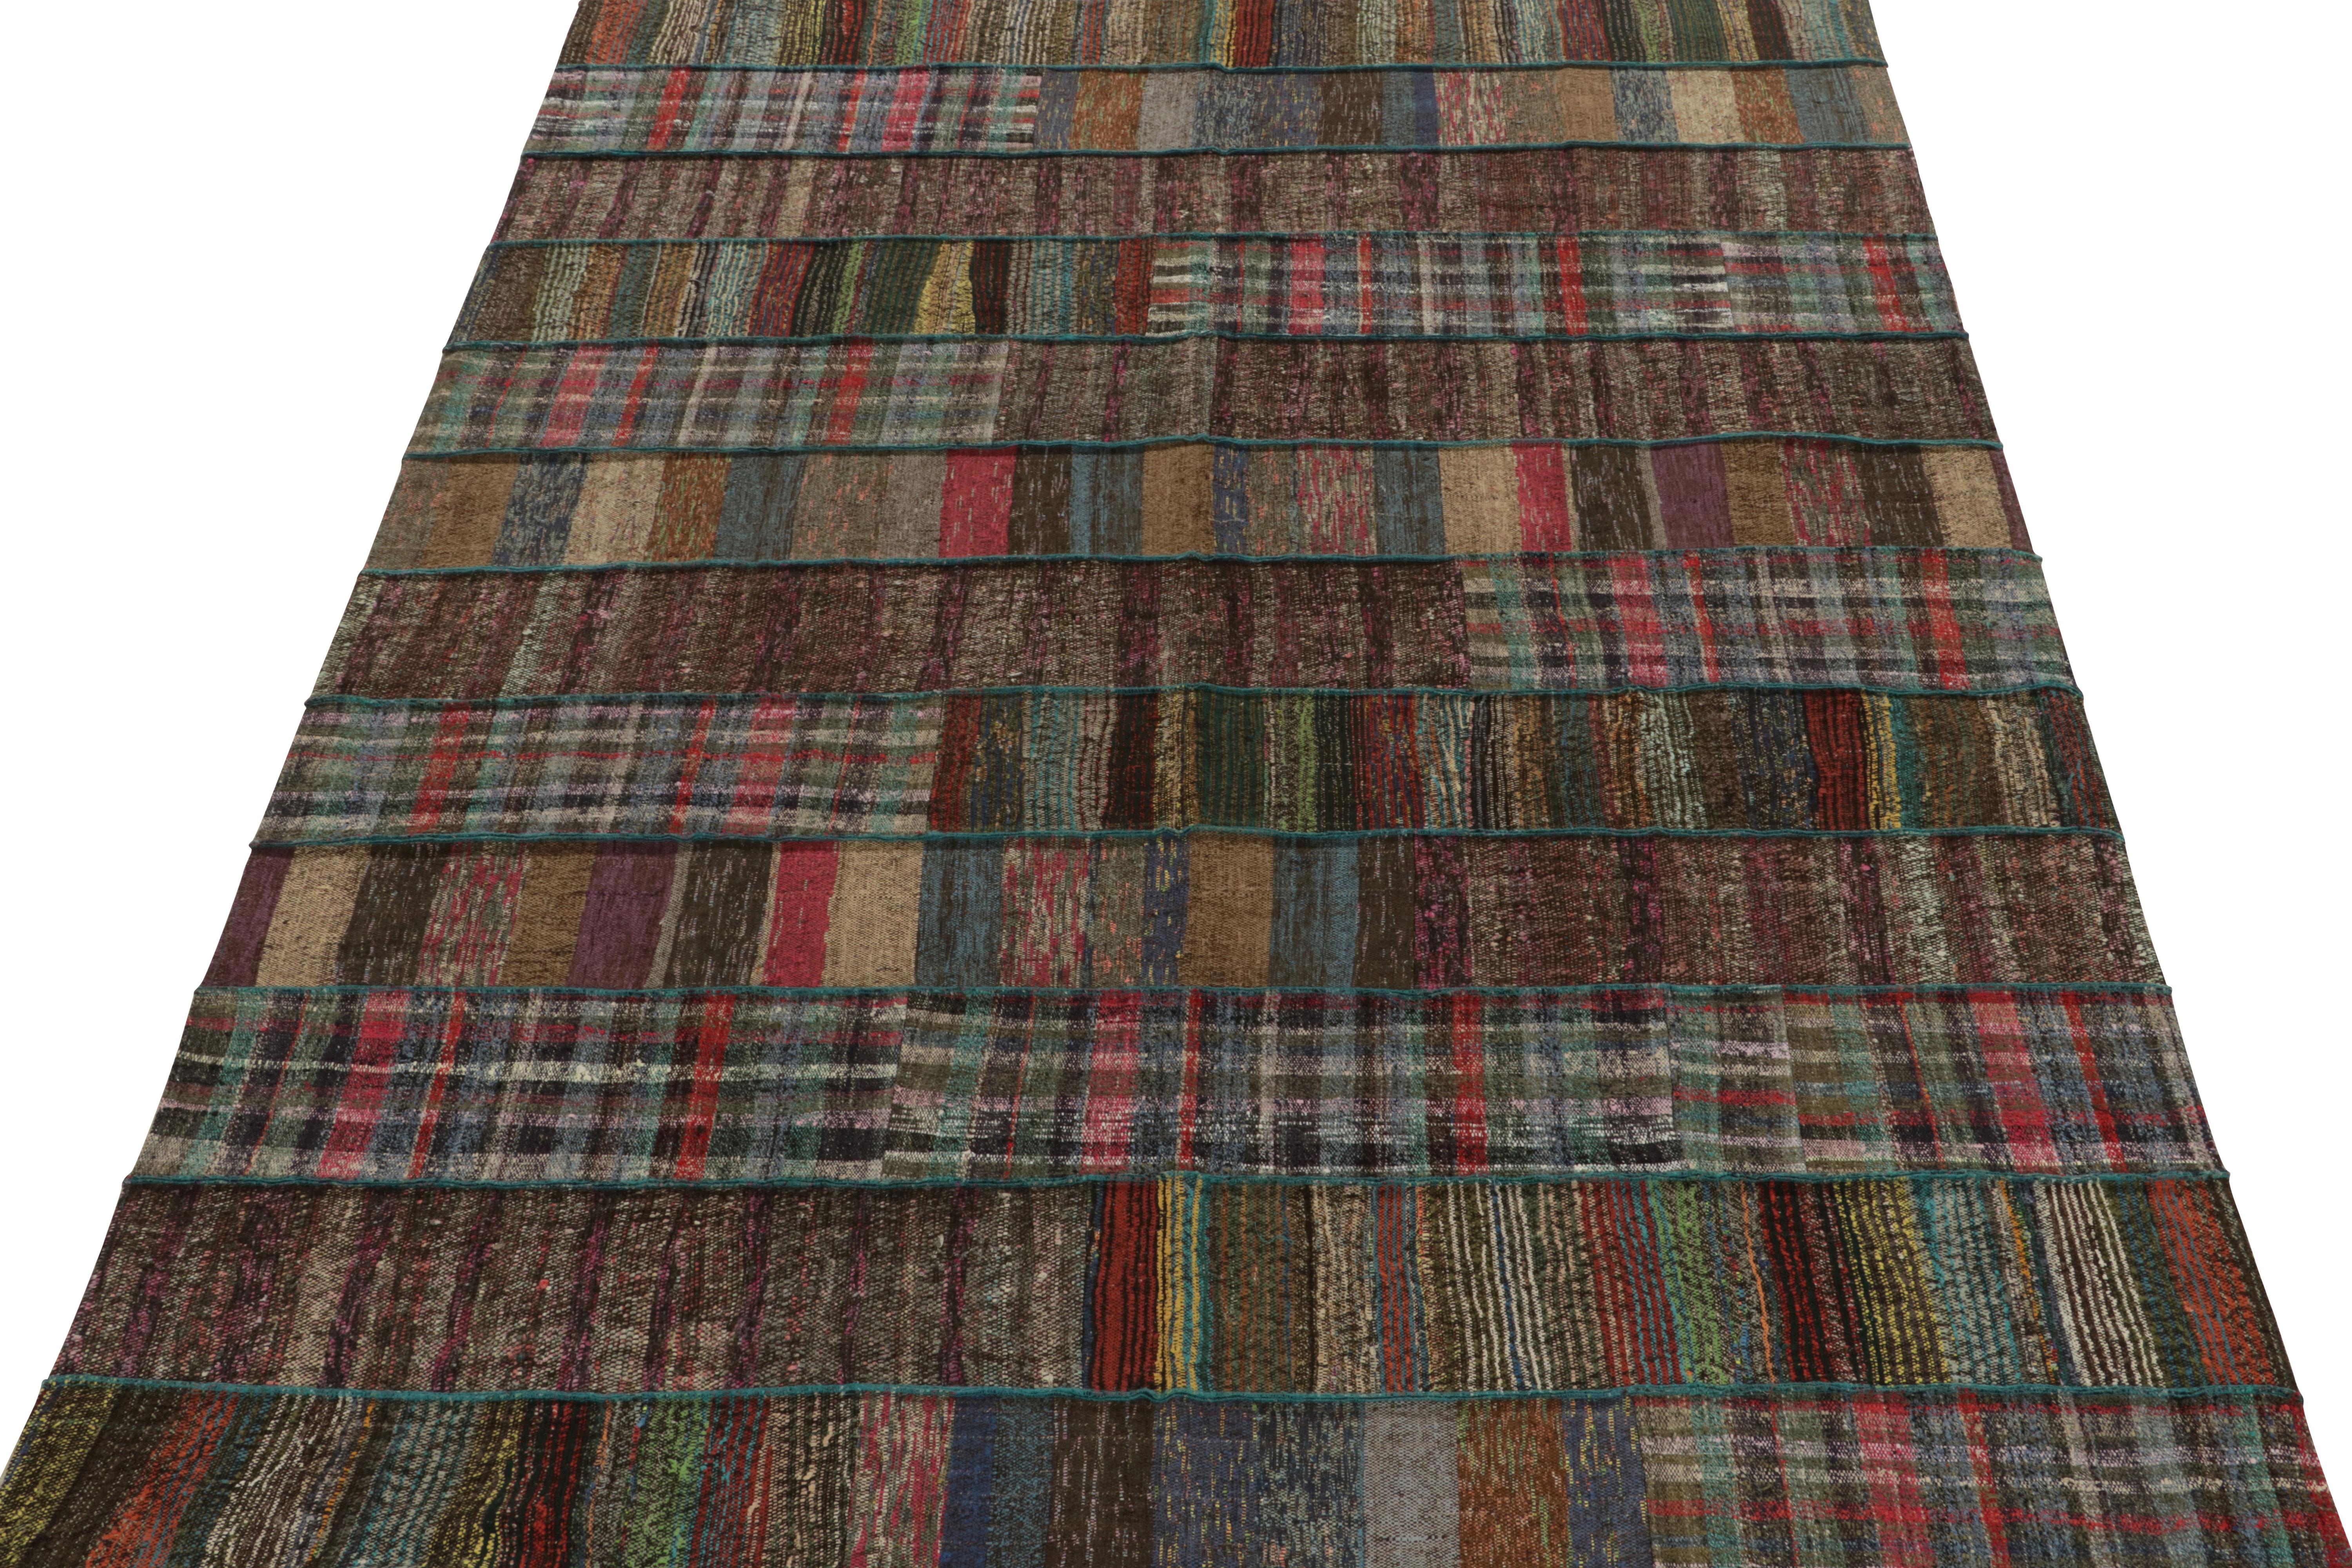 Rug & Kilim takes pride in presenting its artistic vision of patchwork kilim that reimagines vintage yarns into unique pieces of art. This 7x10 flatweave features a striated pattern that lends a smooth sense of movement in variegated shades across